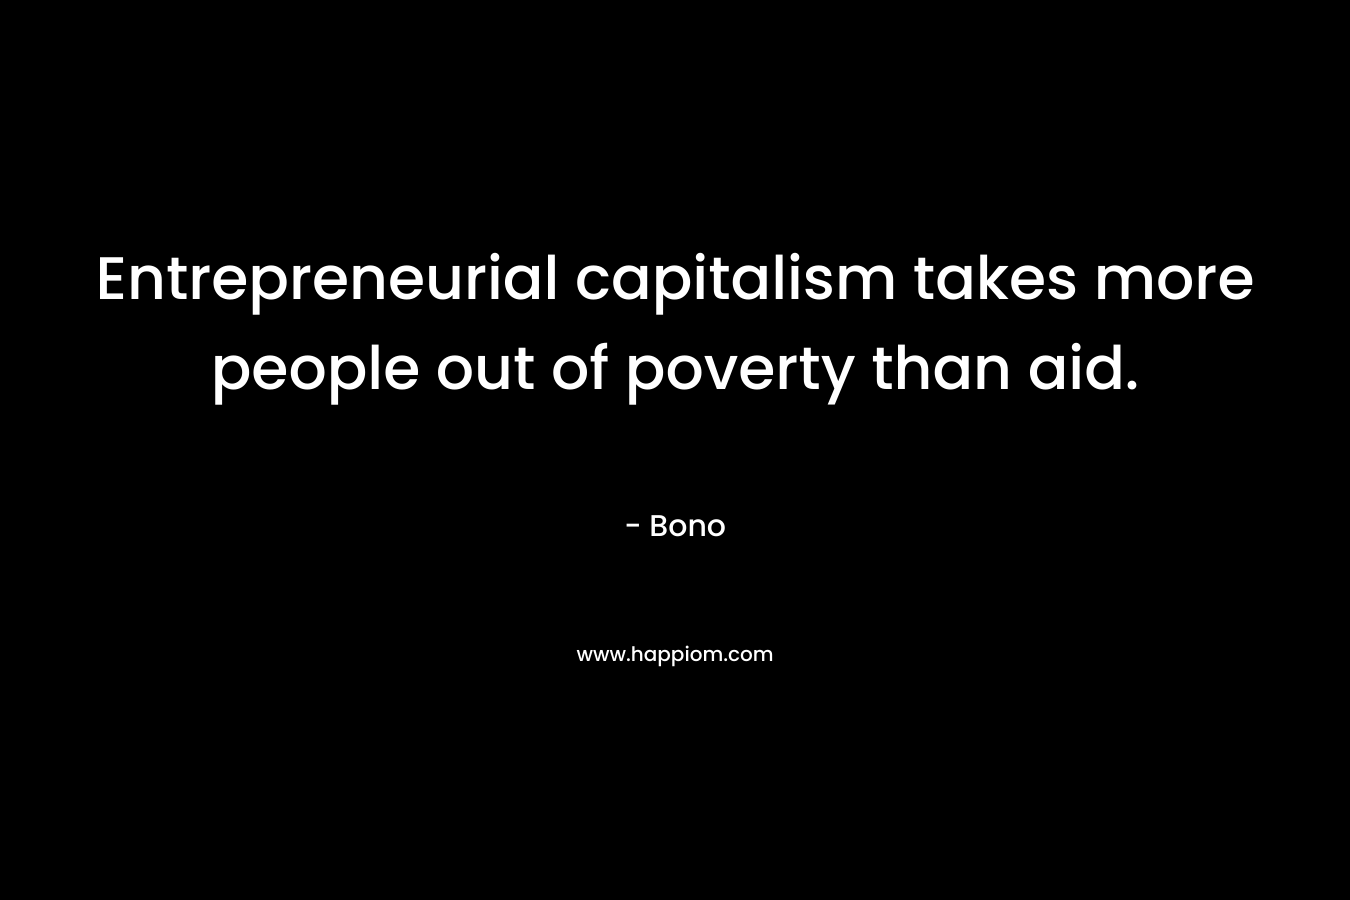 Entrepreneurial capitalism takes more people out of poverty than aid.